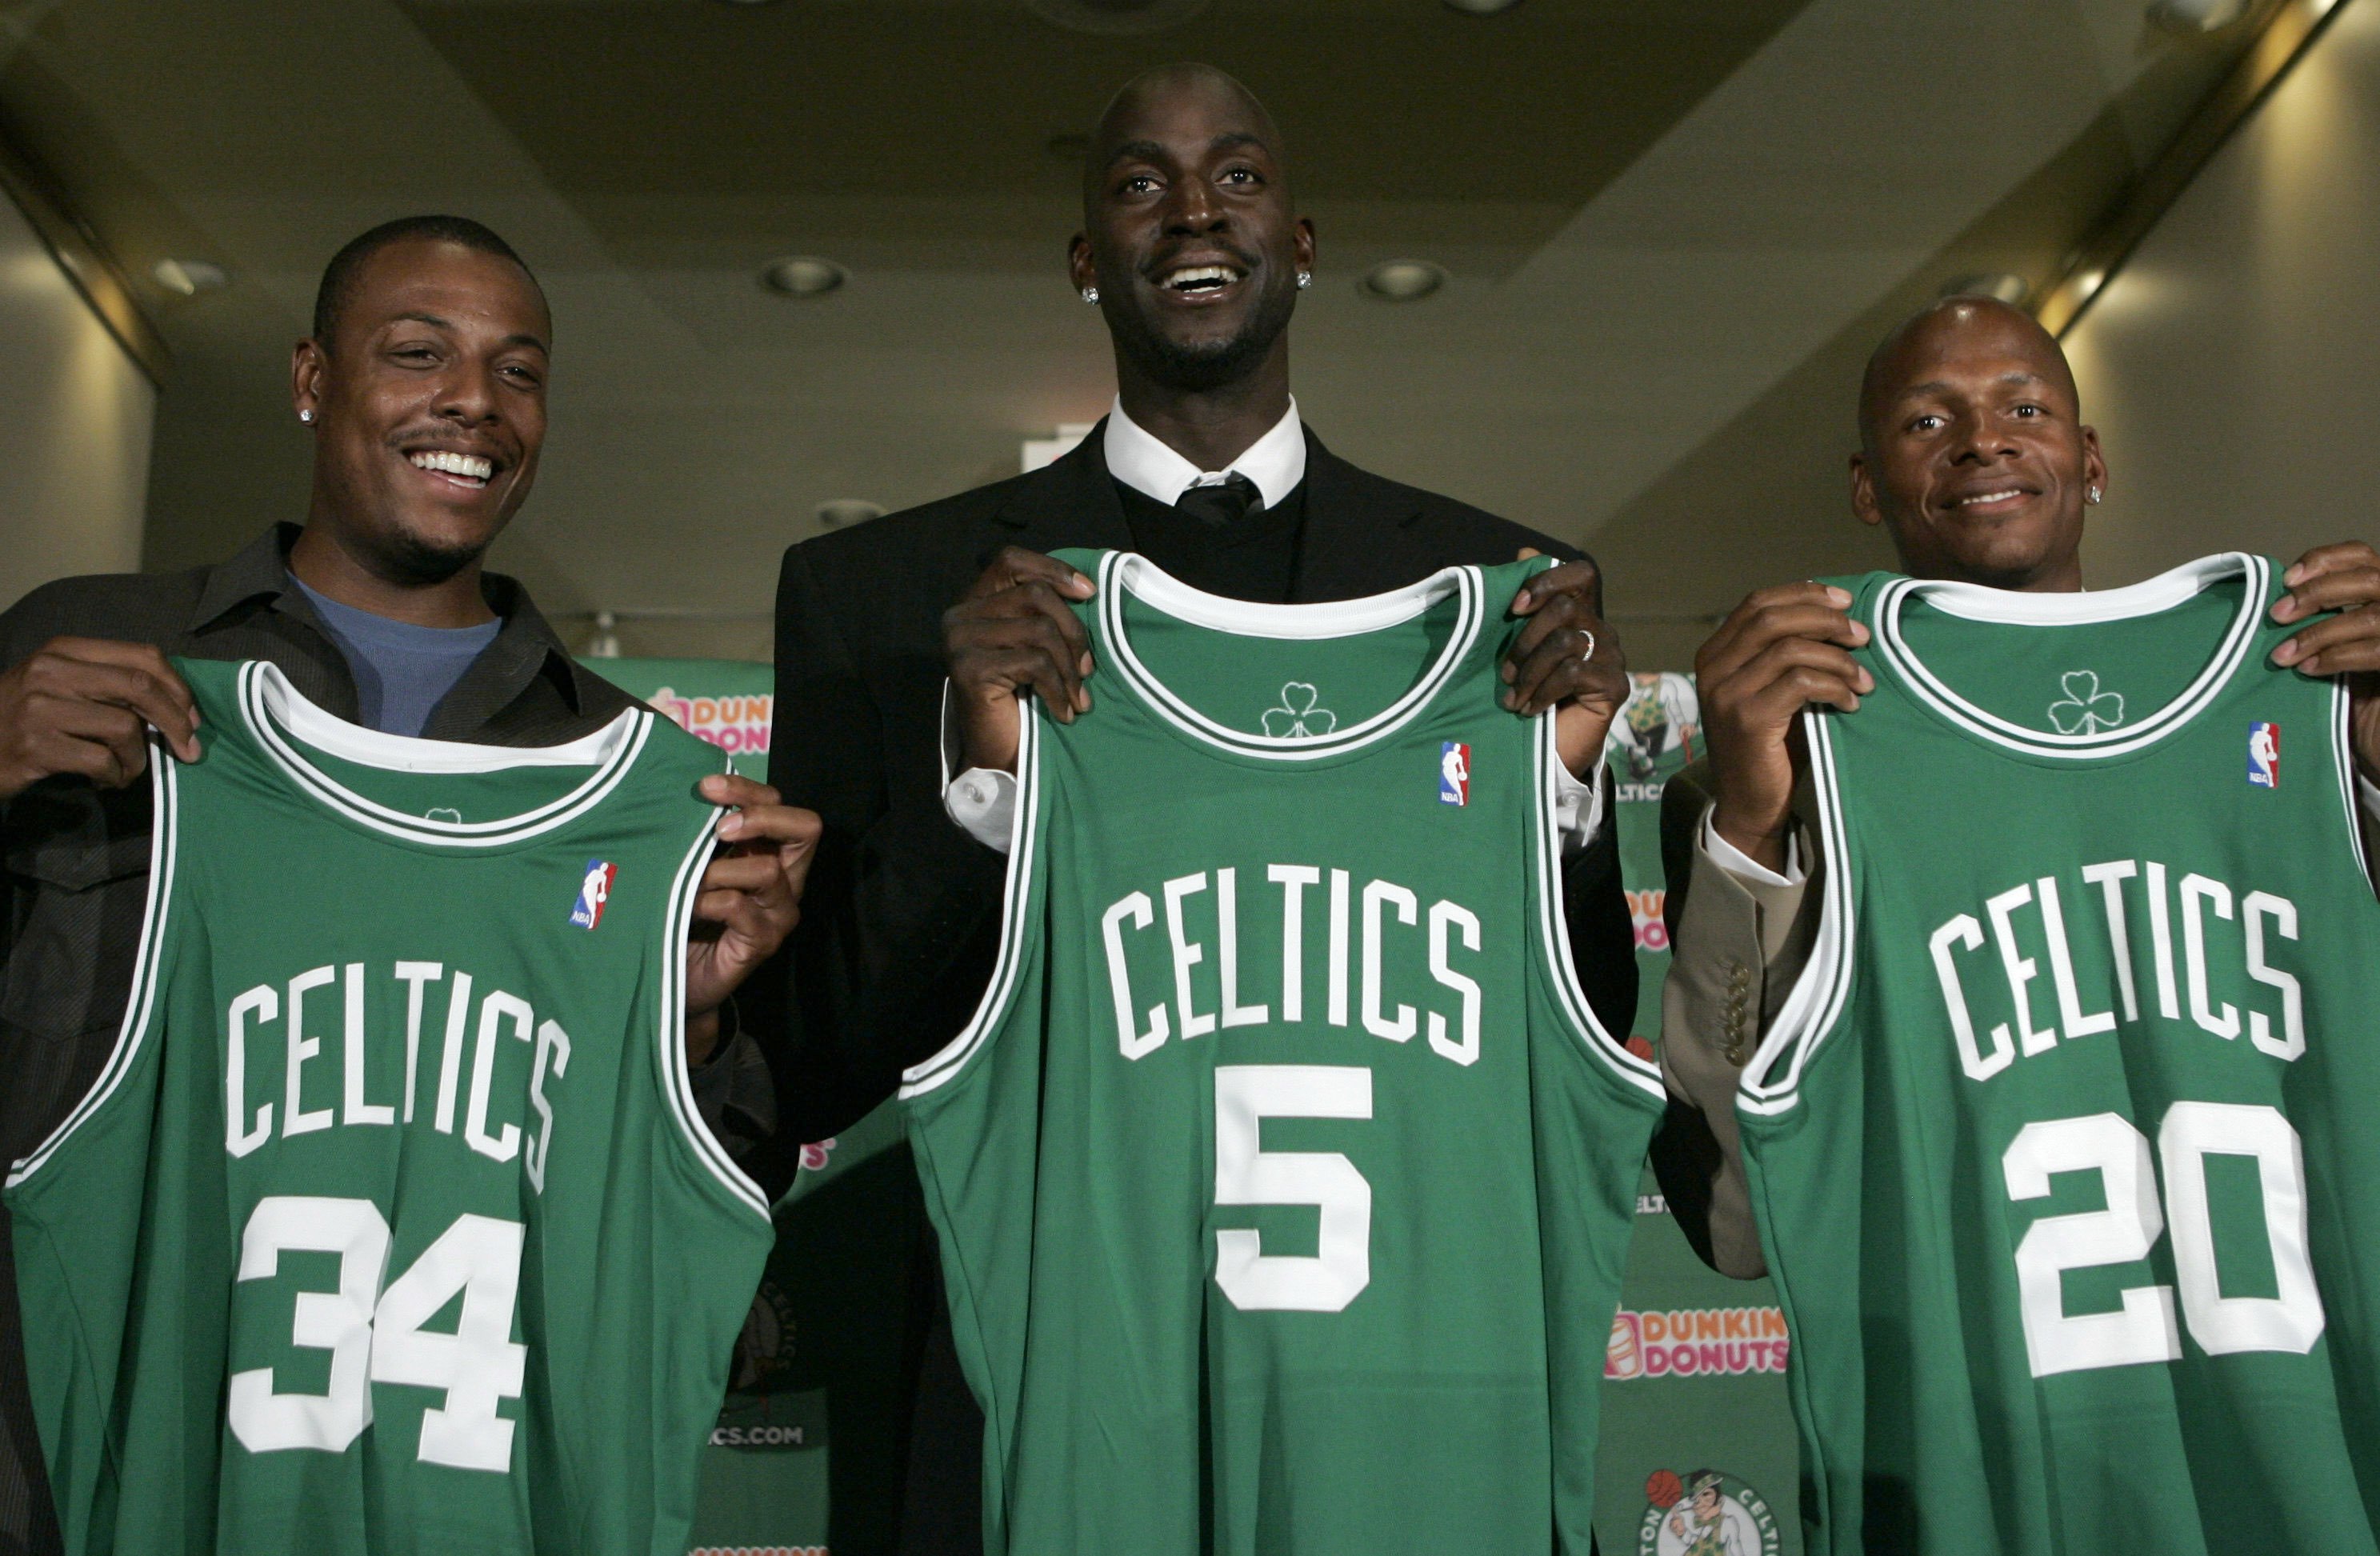 Remember when Shaq rocked the Celtics jersey and Wade suited up for the Cavs?